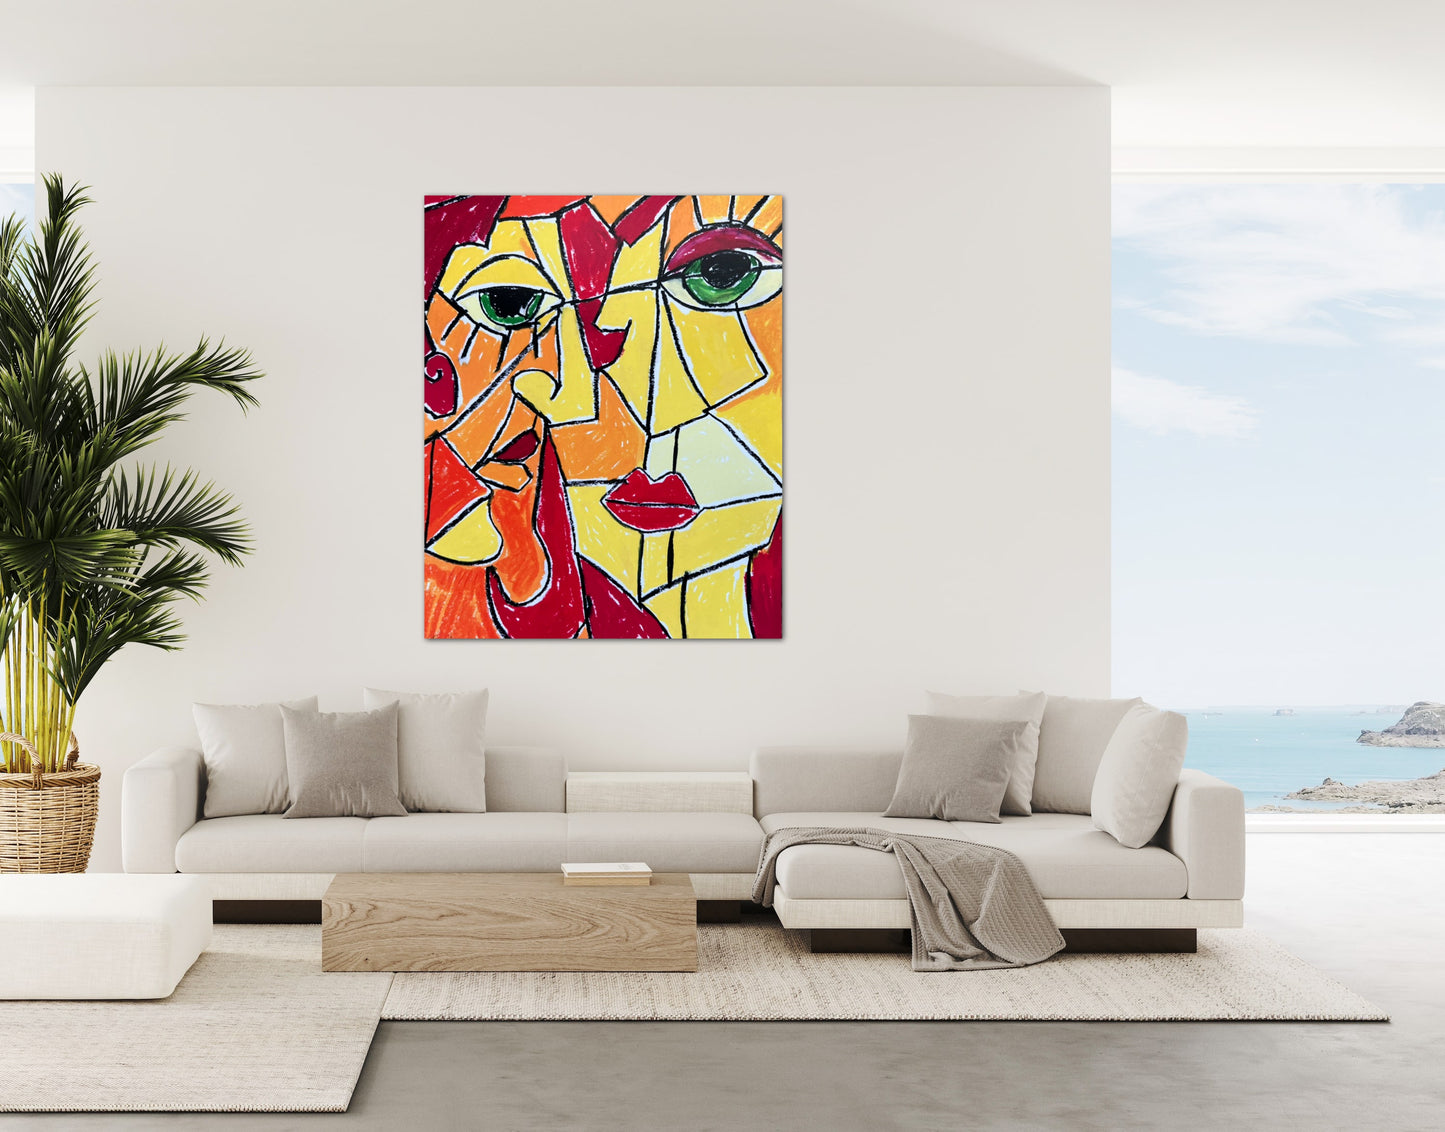 Portrait in Picasso Style - Print, Poster, Stretched Canvas Print